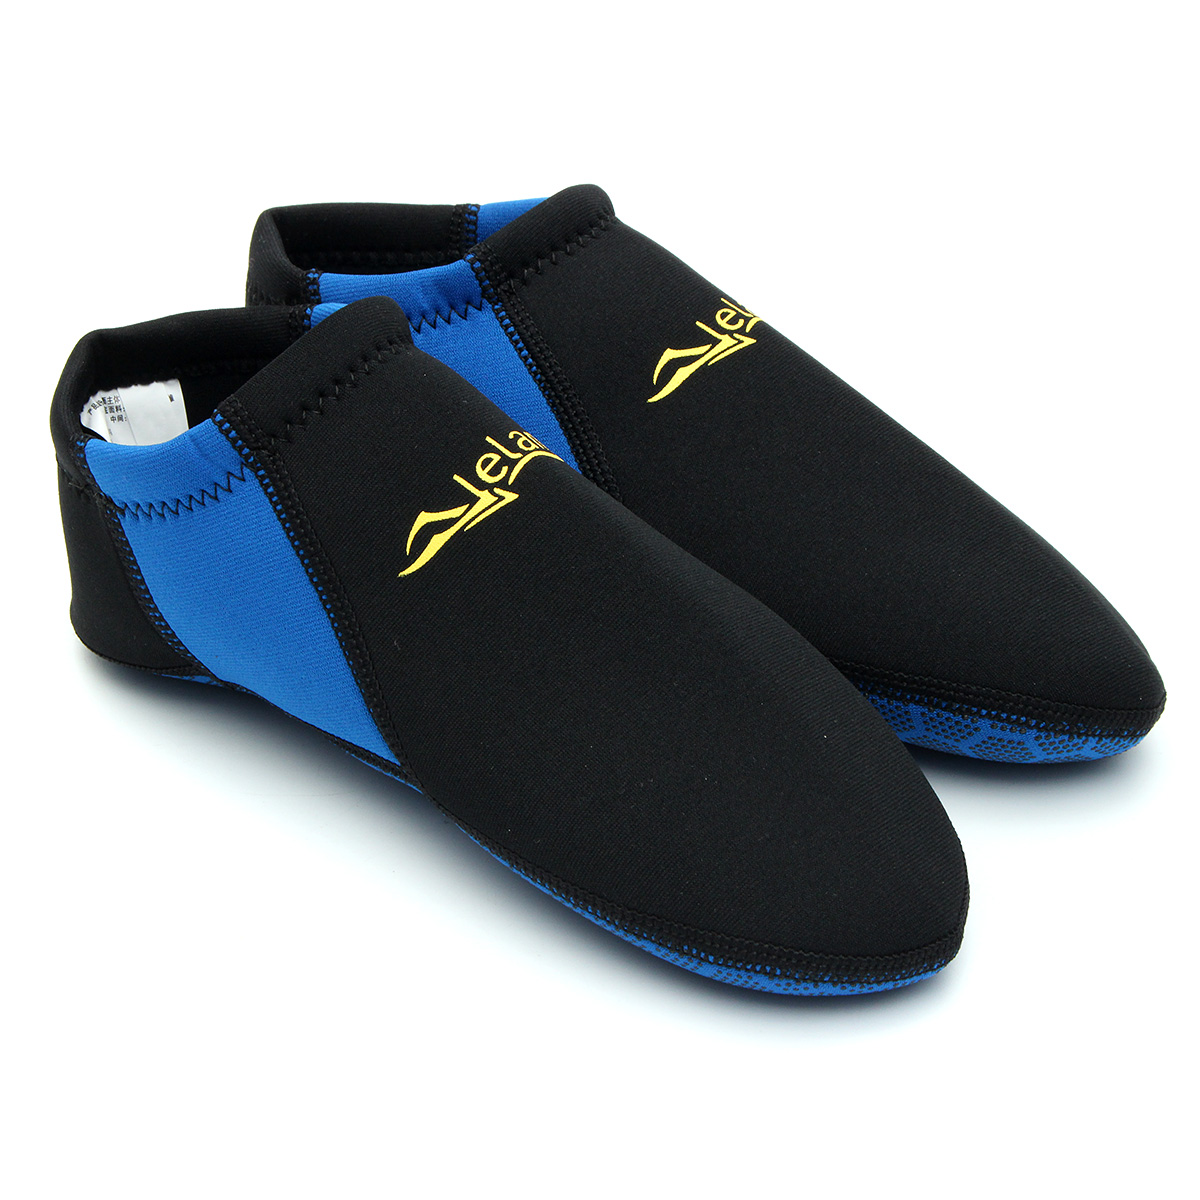 Outdoor-Swimming-Snorkel-Socks-Soft-Beach-Shoes-Water-Sport-Scuba-Surf-Diving-1130872